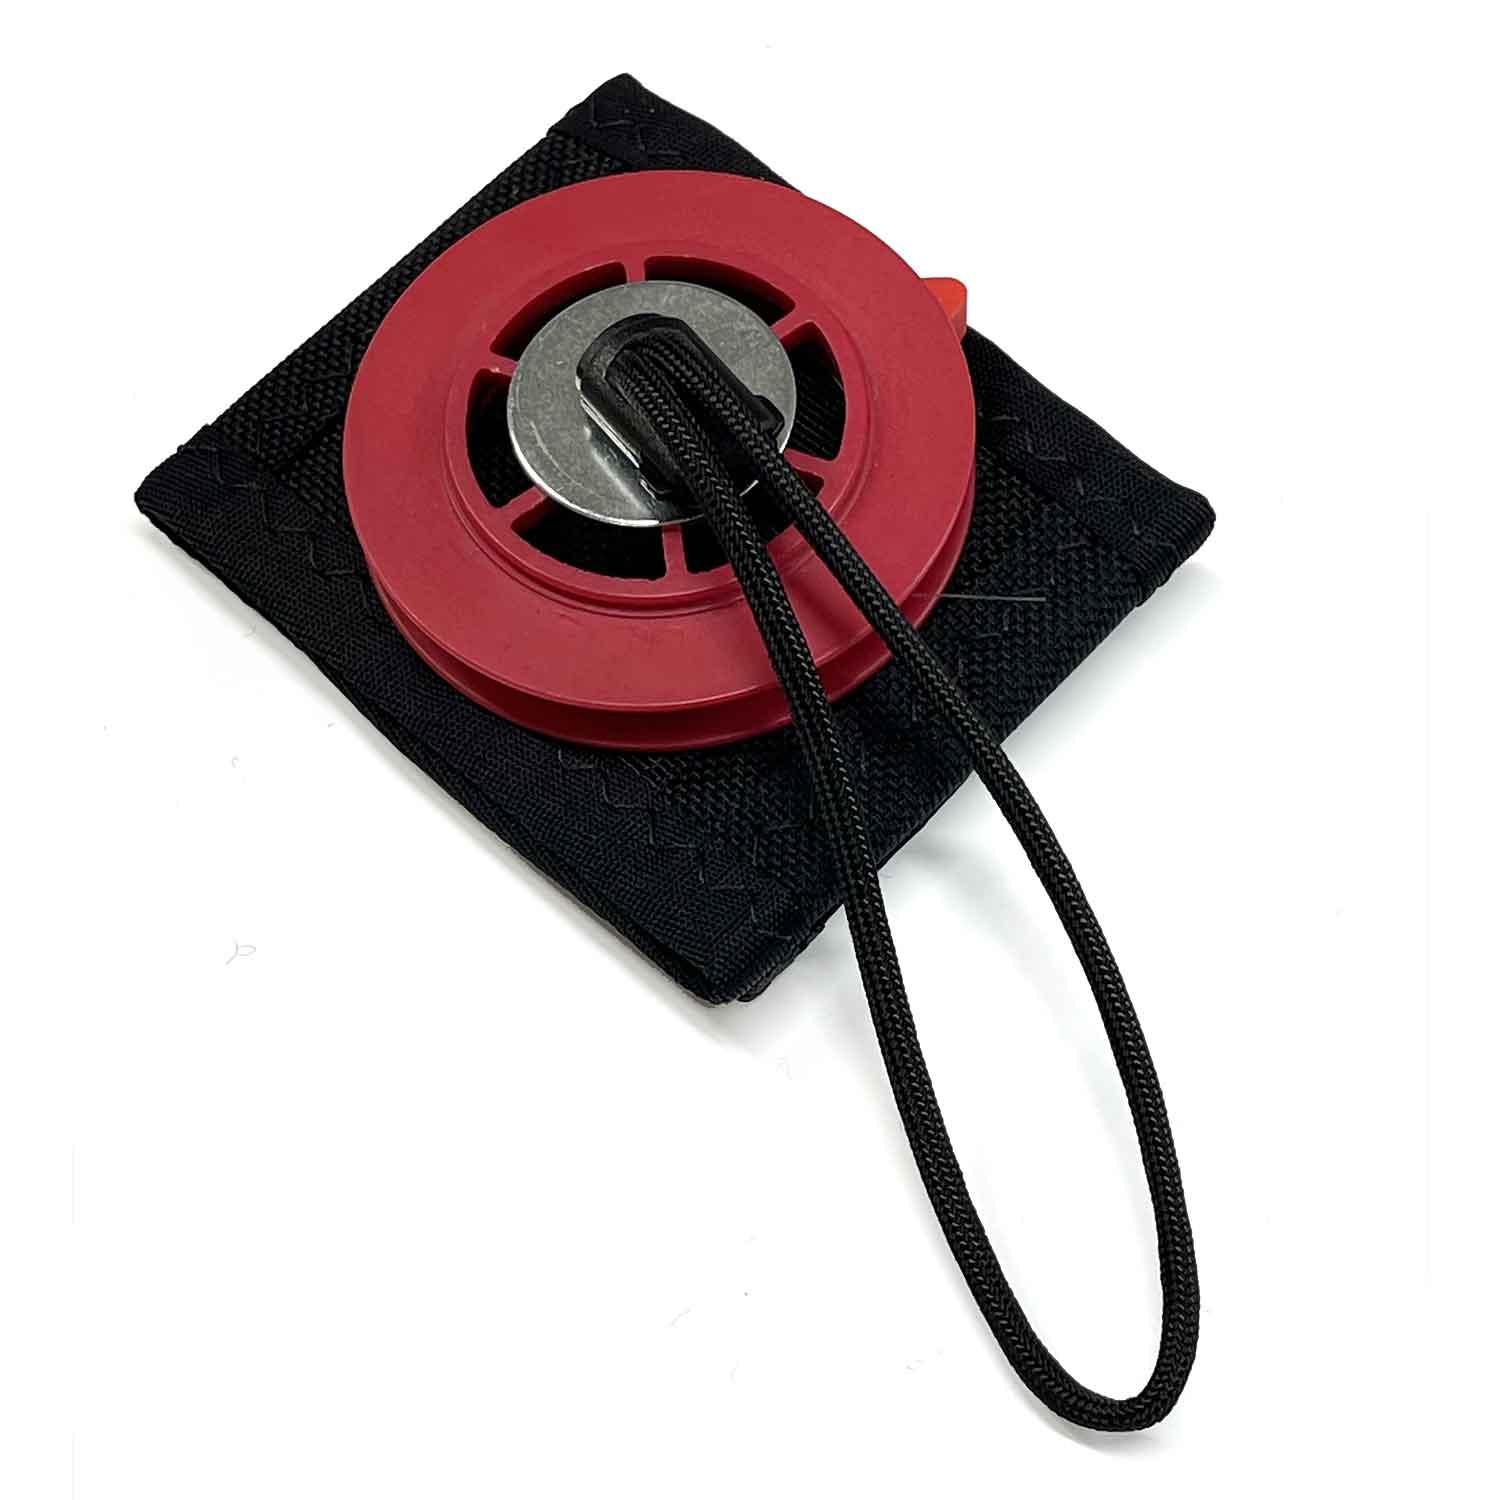 Wifreo Fly Fishing Tippet Holder Tippet T Spool Holder with Bottle Holder  Fly Fishing Accessory